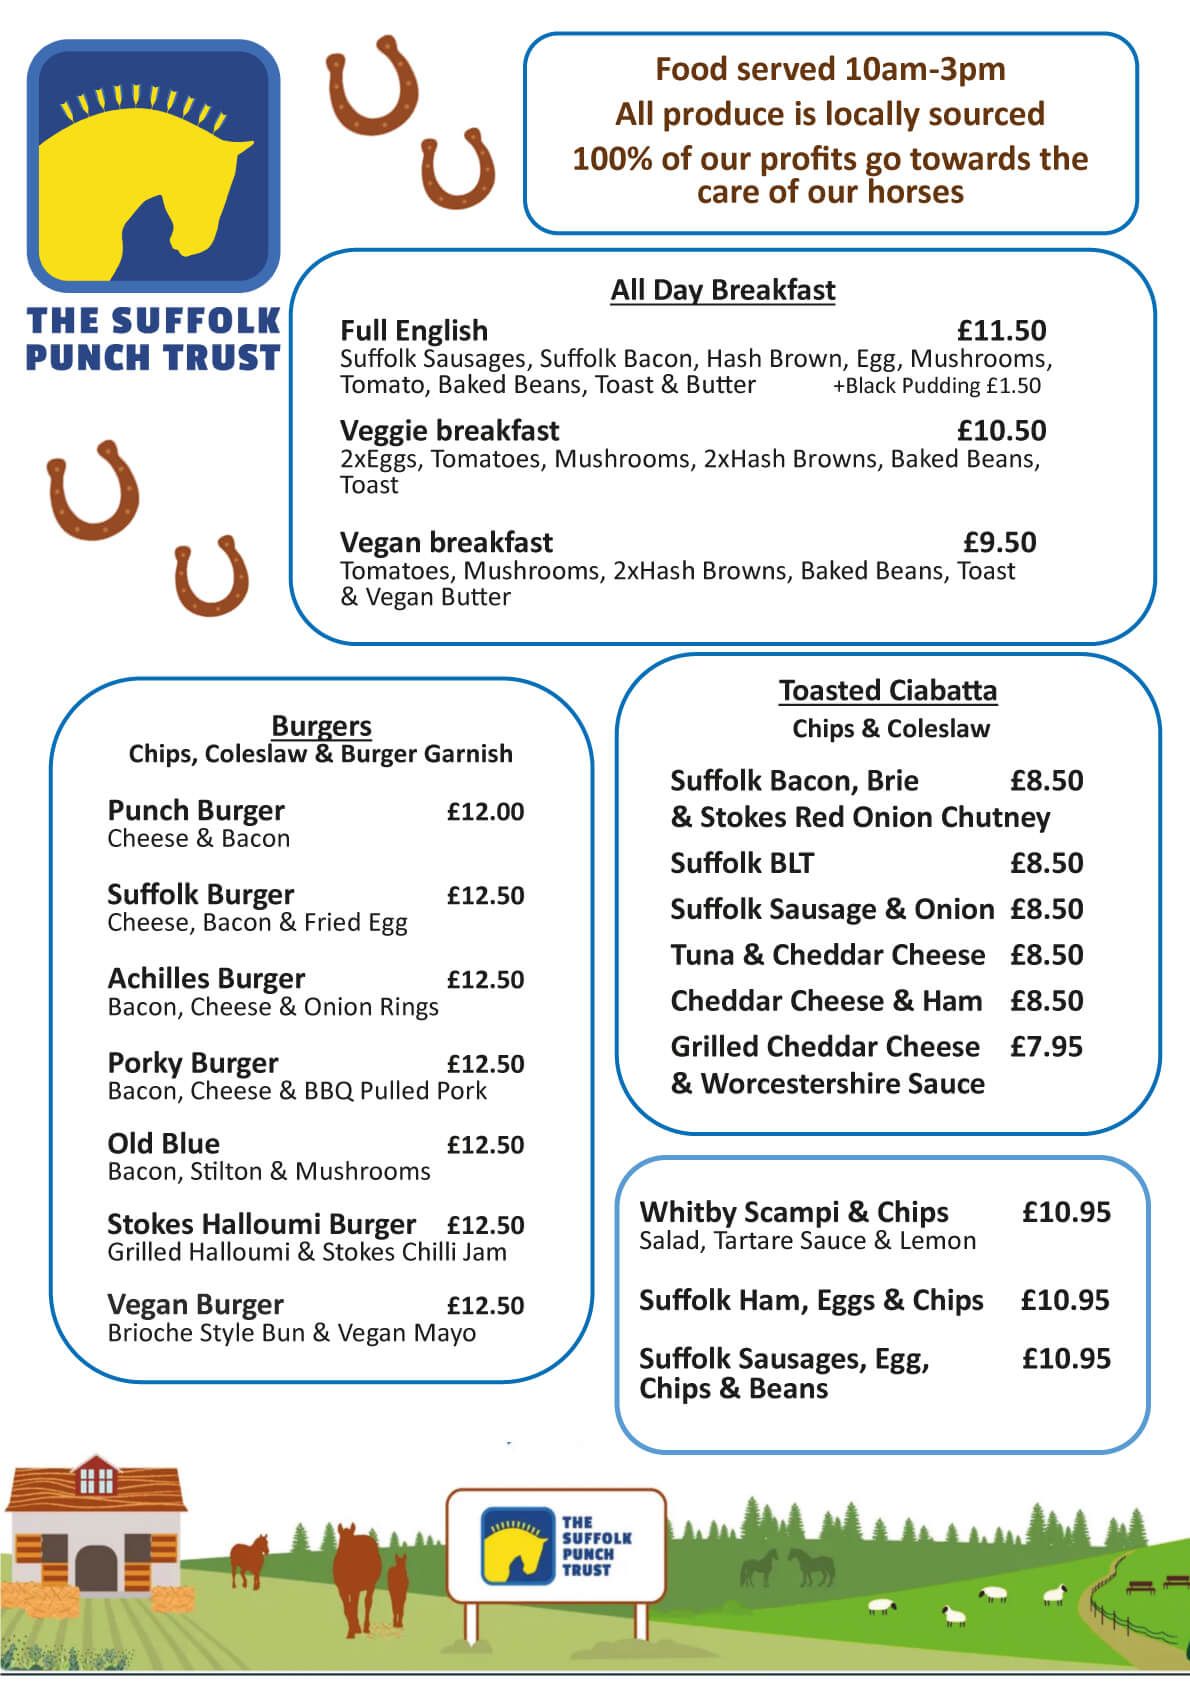 The Suffolk Punch Trust Menu, with locally sourced produce, all days breakfasts, burgers, toasties, and pub favourites